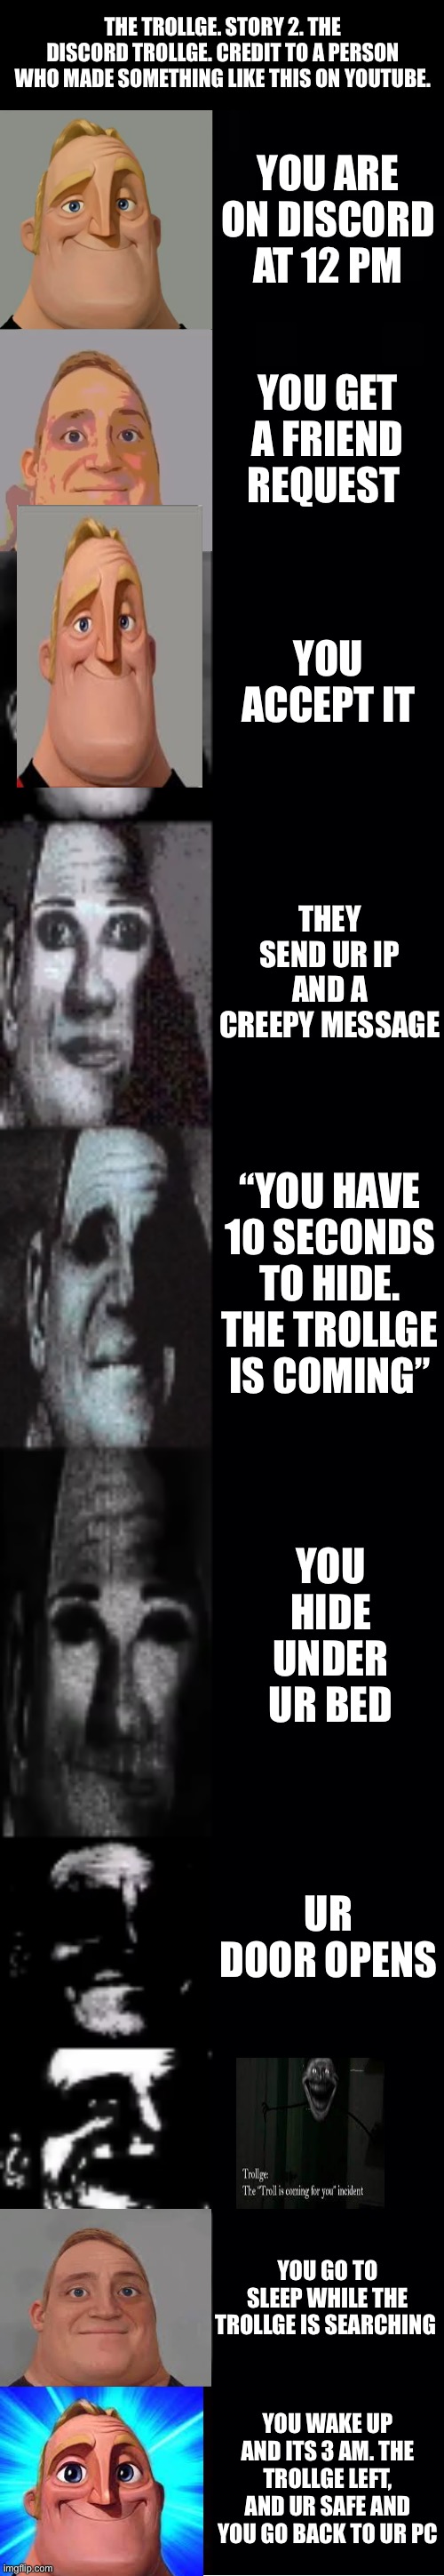 The Trollge part 2 | THE TROLLGE. STORY 2. THE DISCORD TROLLGE. CREDIT TO A PERSON WHO MADE SOMETHING LIKE THIS ON YOUTUBE. YOU ARE ON DISCORD AT 12 PM; YOU GET A FRIEND REQUEST; YOU ACCEPT IT; THEY SEND UR IP AND A CREEPY MESSAGE; “YOU HAVE 10 SECONDS TO HIDE. THE TROLLGE IS COMING”; YOU HIDE UNDER UR BED; UR DOOR OPENS; YOU GO TO SLEEP WHILE THE TROLLGE IS SEARCHING; YOU WAKE UP AND ITS 3 AM. THE TROLLGE LEFT, AND UR SAFE AND YOU GO BACK TO UR PC | image tagged in mr incredible becoming uncanny | made w/ Imgflip meme maker